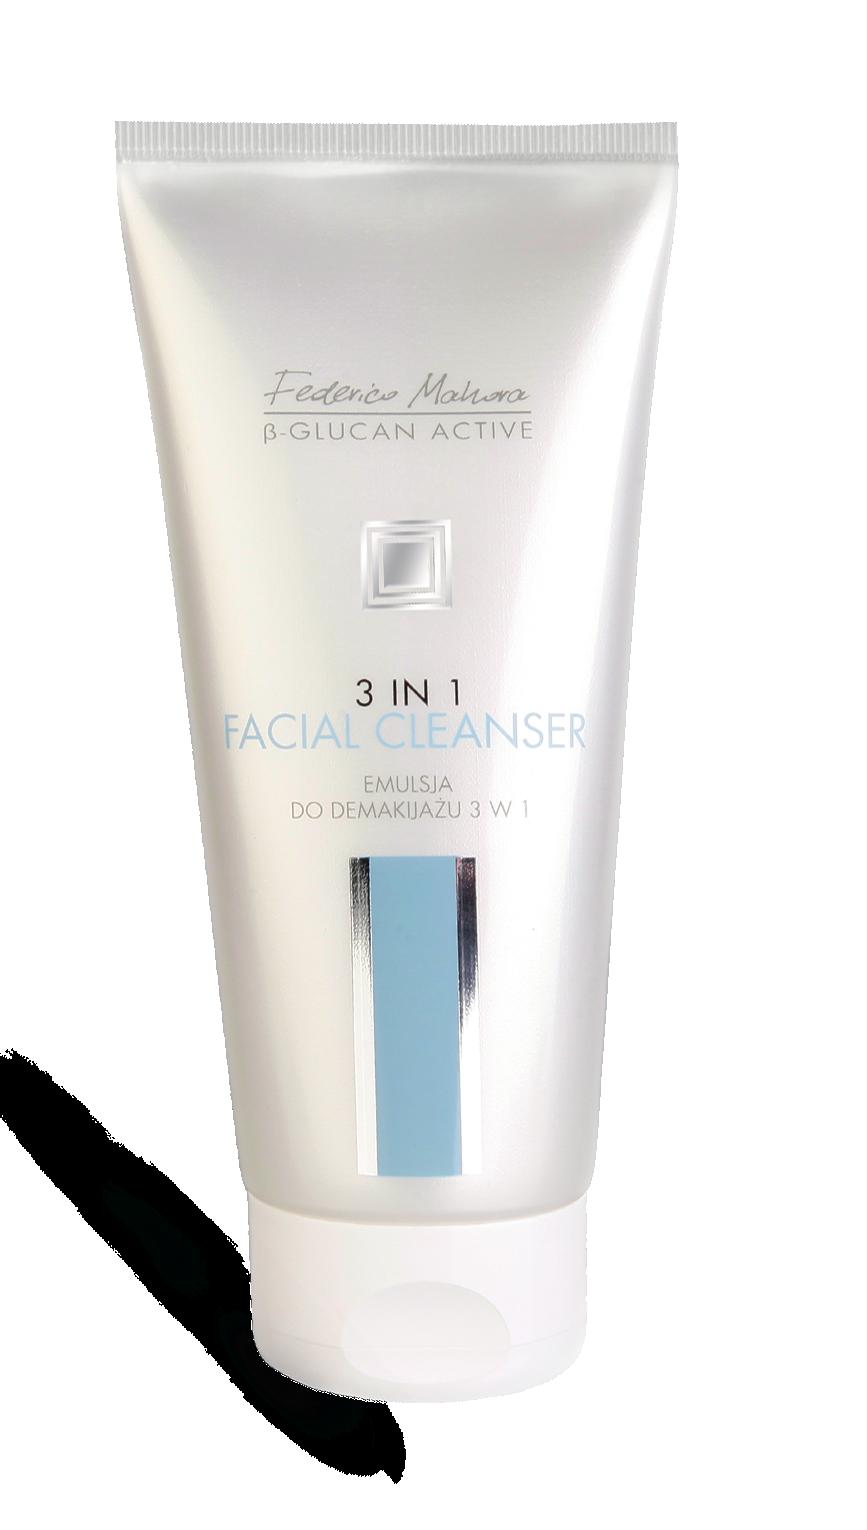 C O L L E C T I O N 3 in 1 Facial Cleanser β-glucan Active What functions does the Facial Cleanser combine?